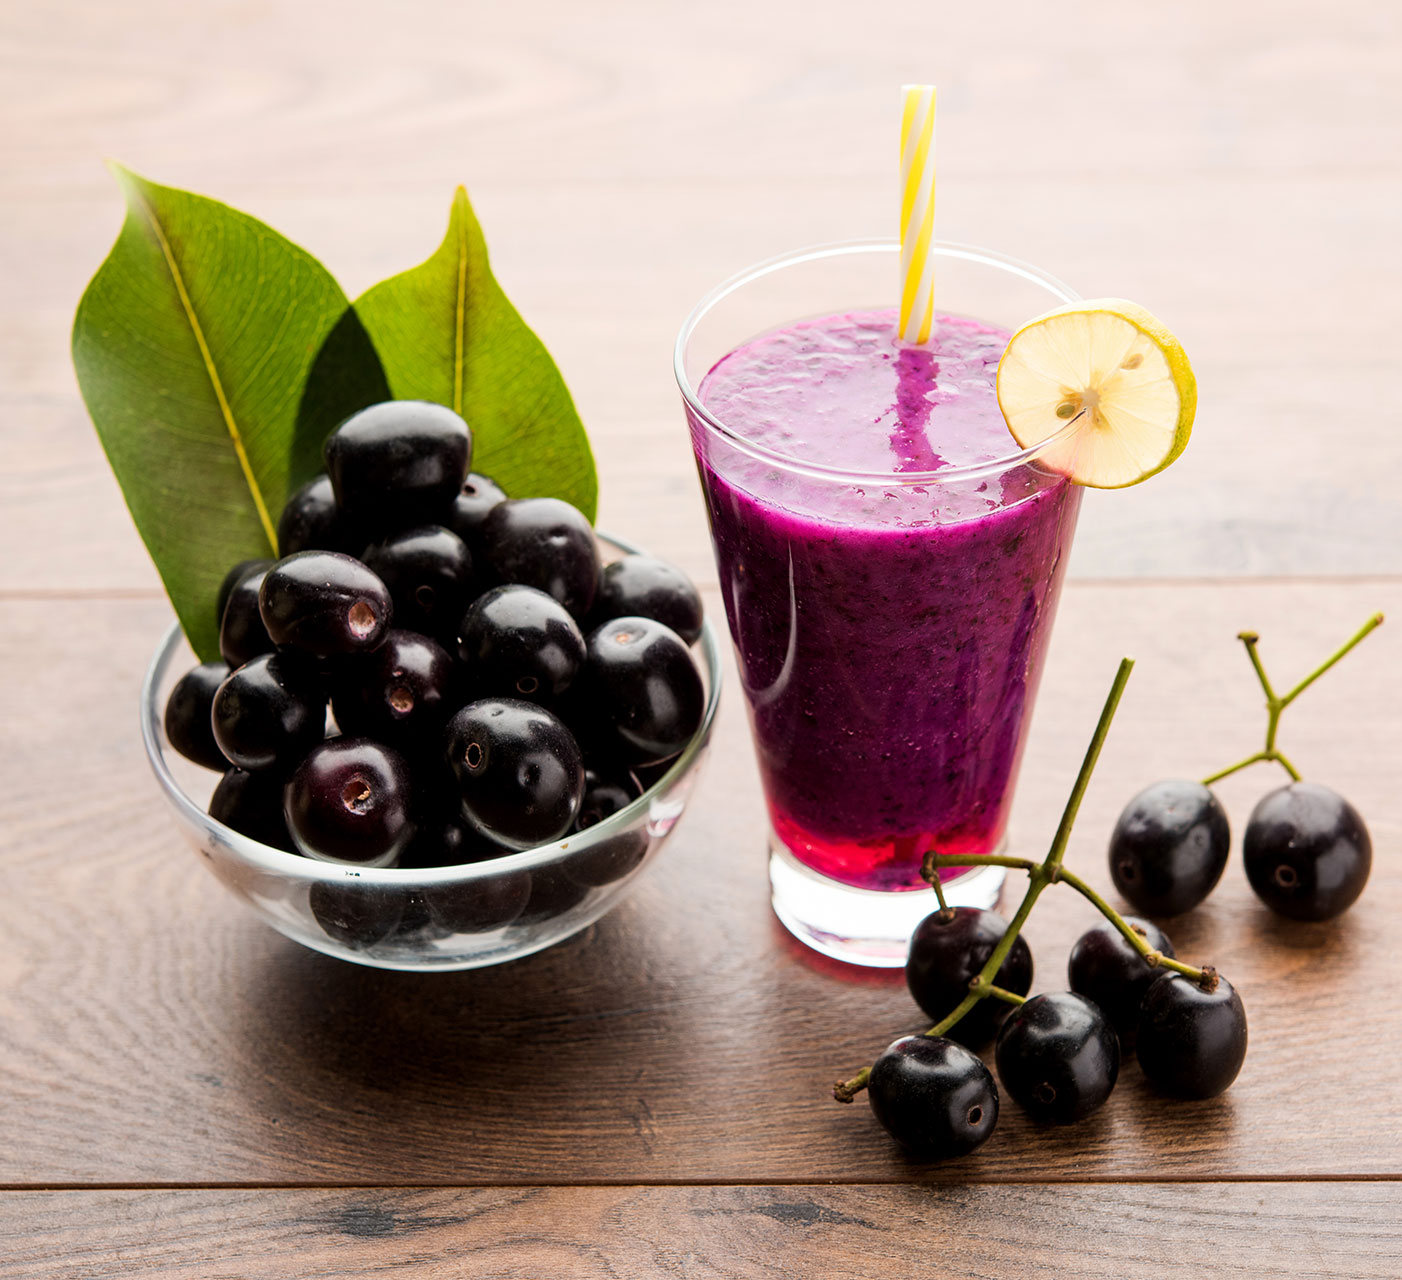 5 Reasons Why Jamun Is Known To Stave Off Diabetes